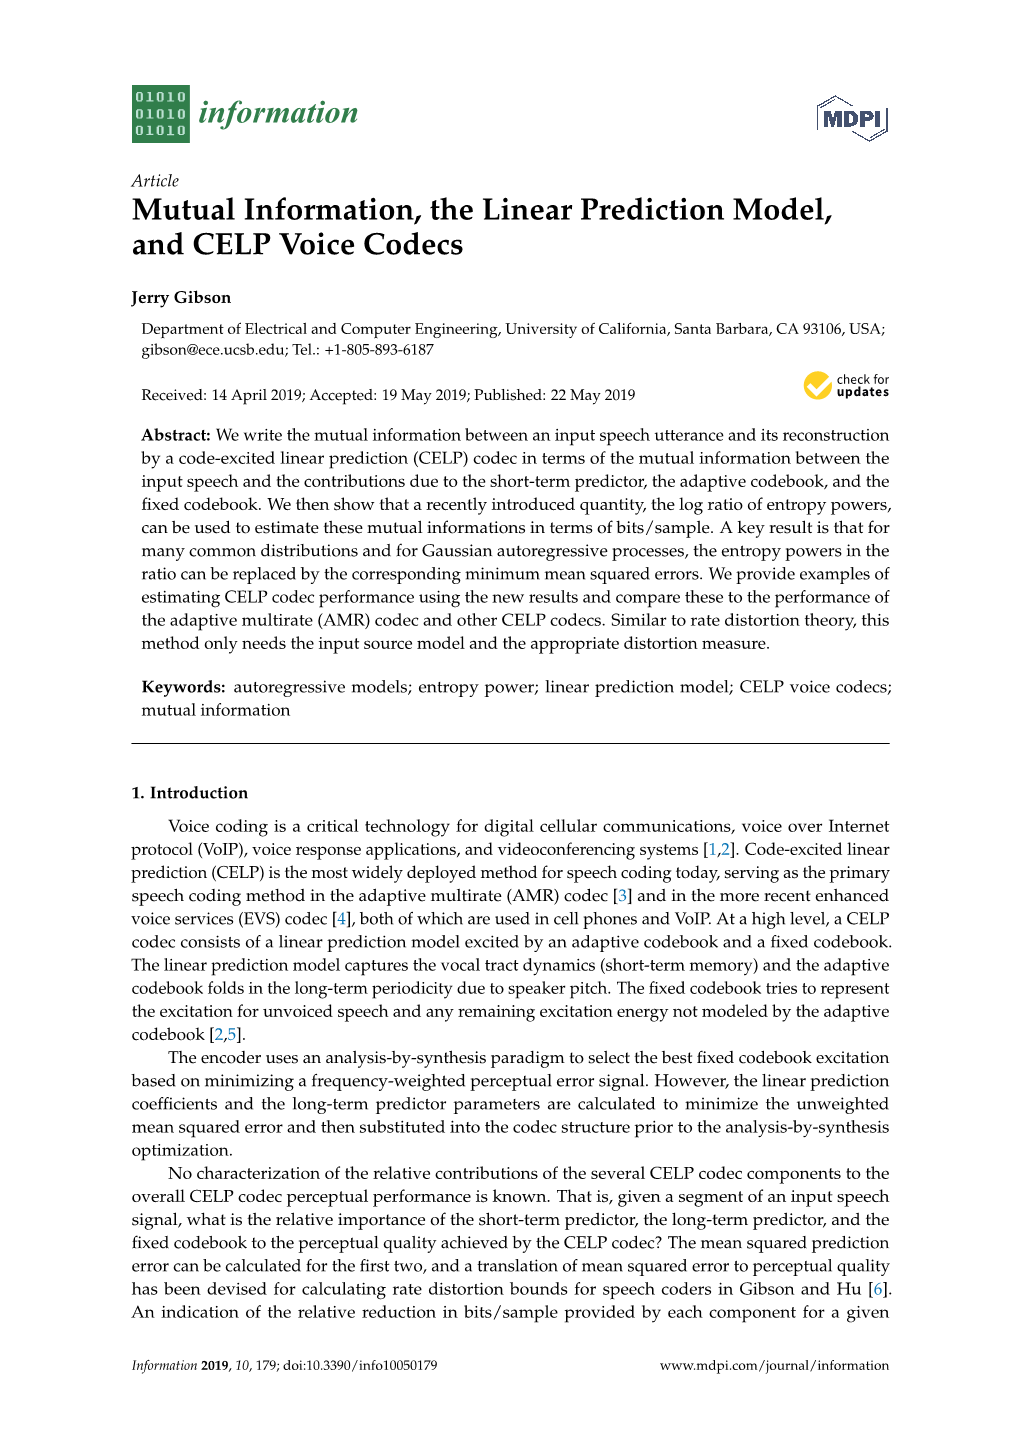 Mutual Information, the Linear Prediction Model, and CELP Voice Codecs